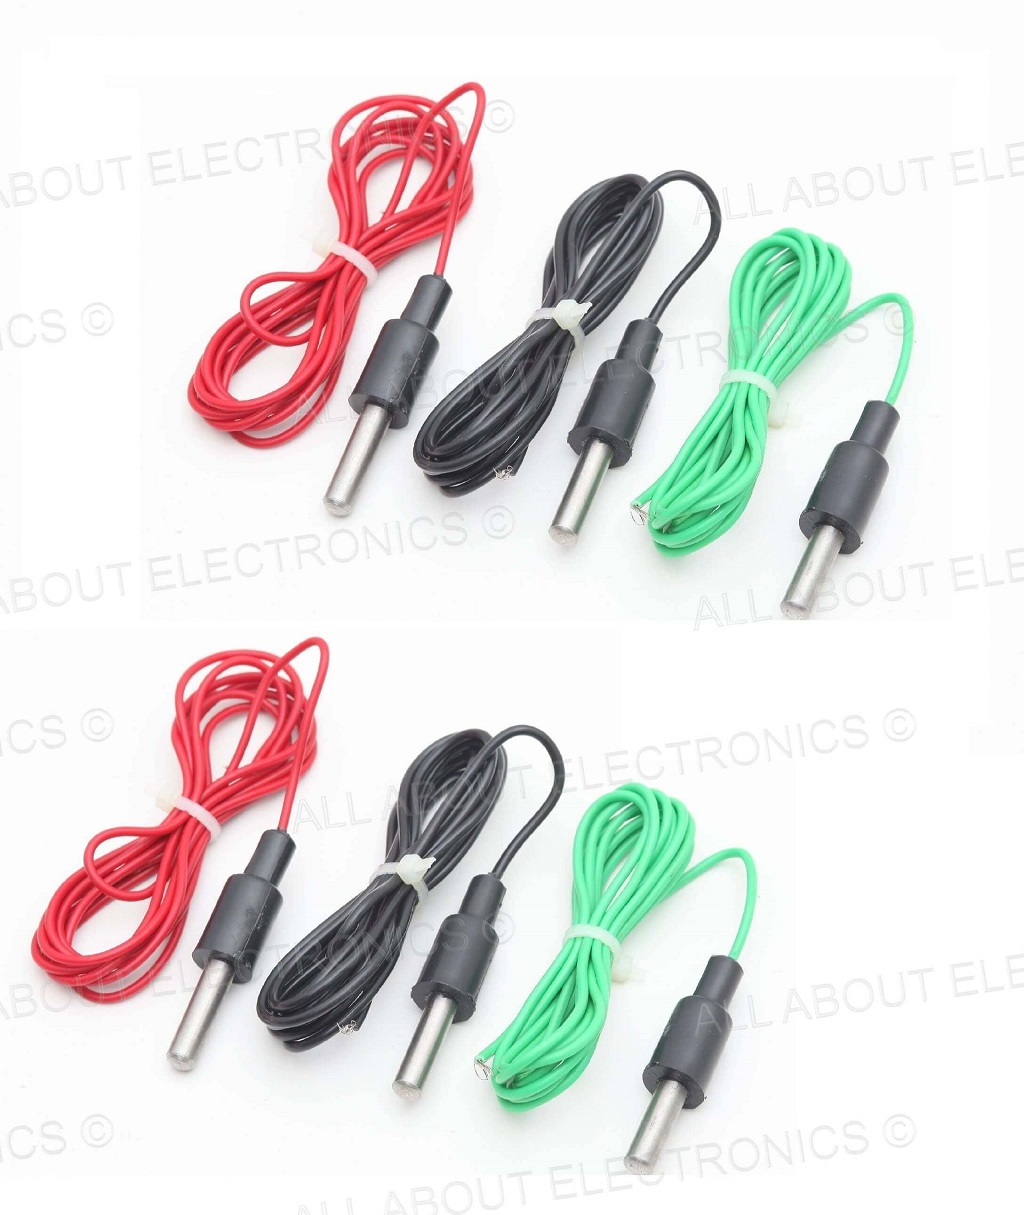 S.S Contact Type Water Level Sensors (Red, Black, Green) -Set of 6 Pieces